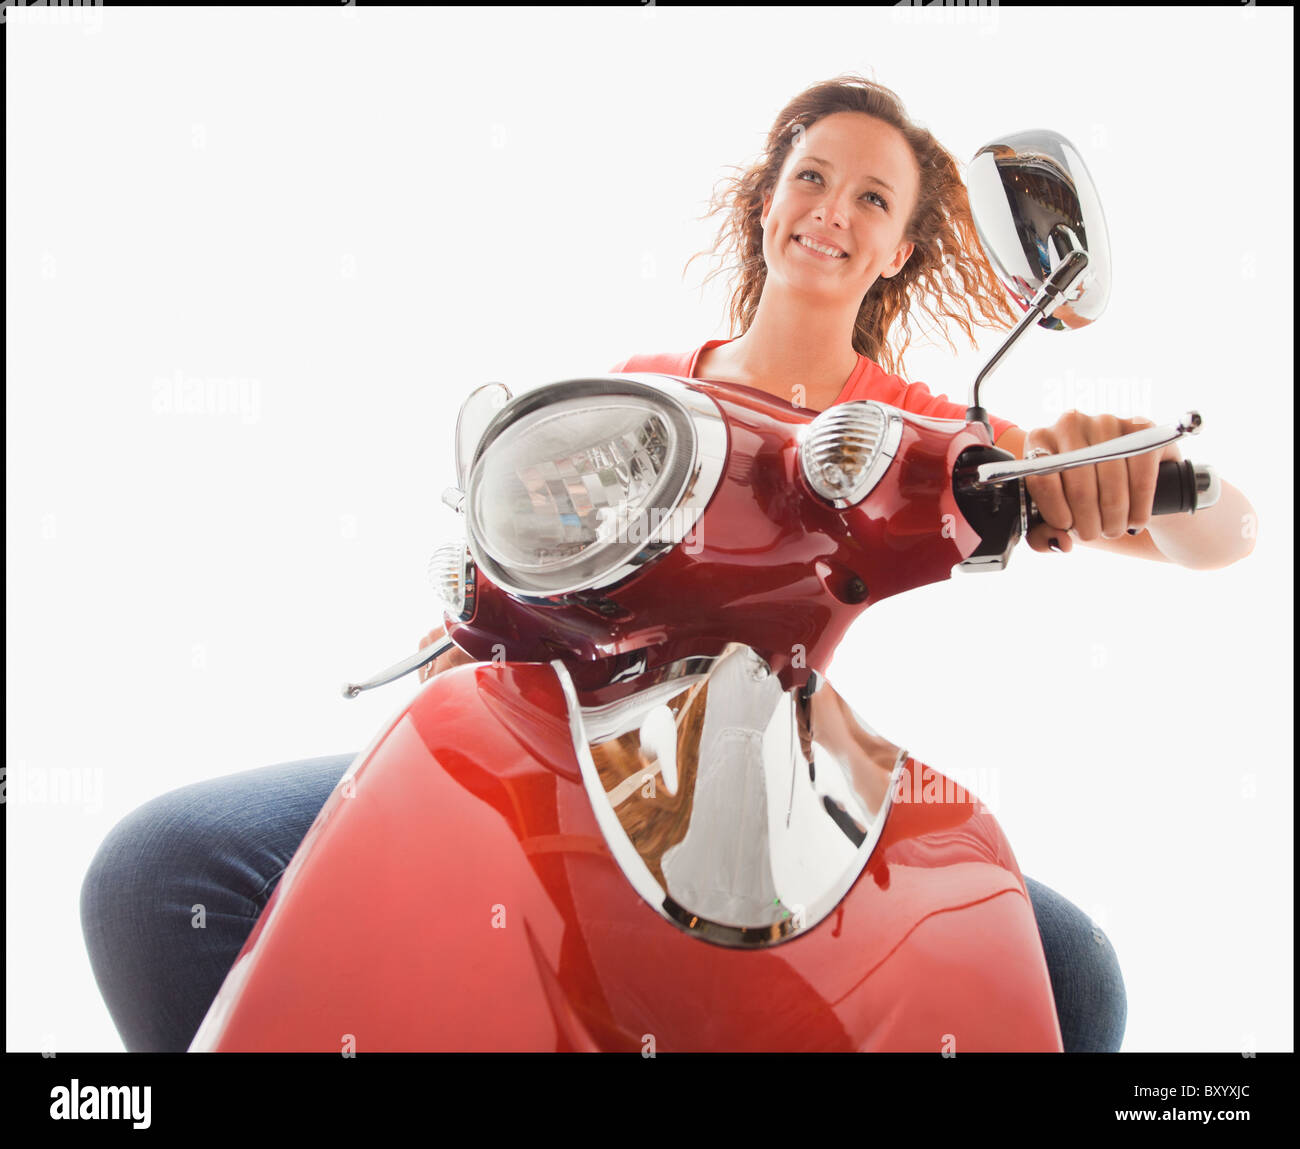 Young girl riding scooter Stock Photo